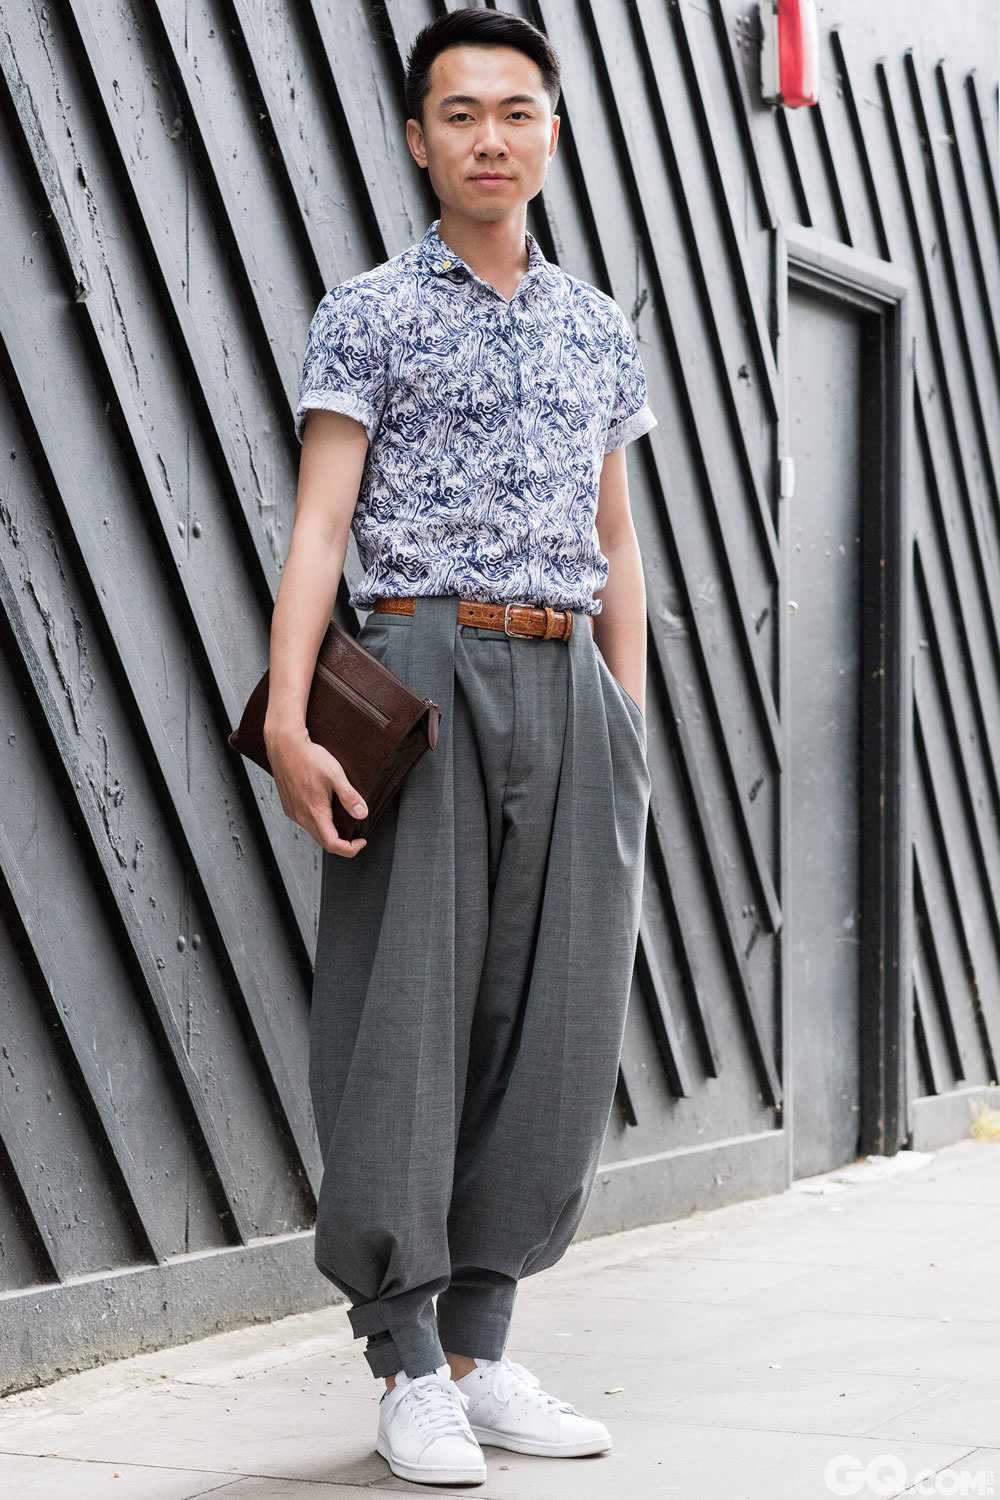 Kevin
Shirt: Top Man
Trousers: Q by McQueen 
Shoes: Adidas by Sam Smith
Clutch: Dries Van Noten

Inspiration: I just got the trousers and I wanted them to be the showpiece. I kind of tried to wear something easy that got well together with it. 
(刚刚买了裤子，想让这件单品成为重点和亮点，我会想尝试让配搭简单一些。)